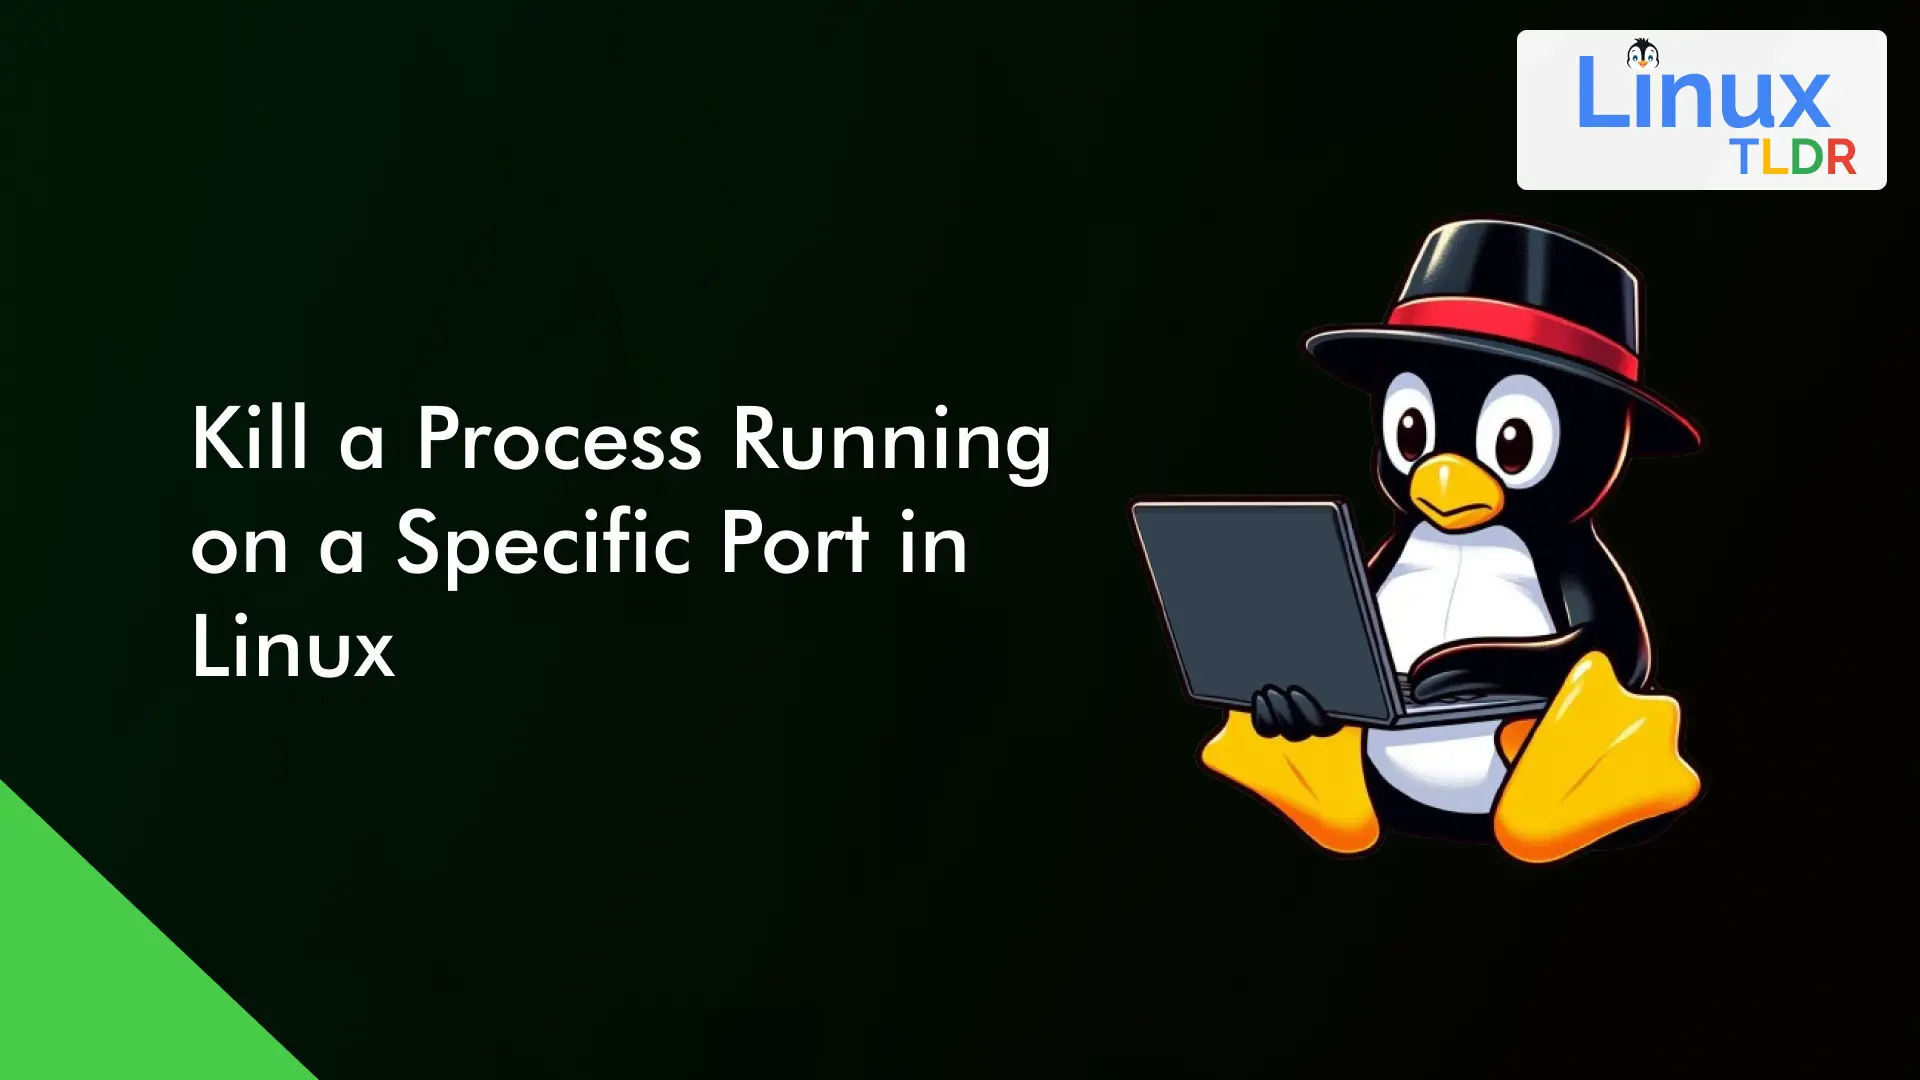 kill a process running on a specific port in linux